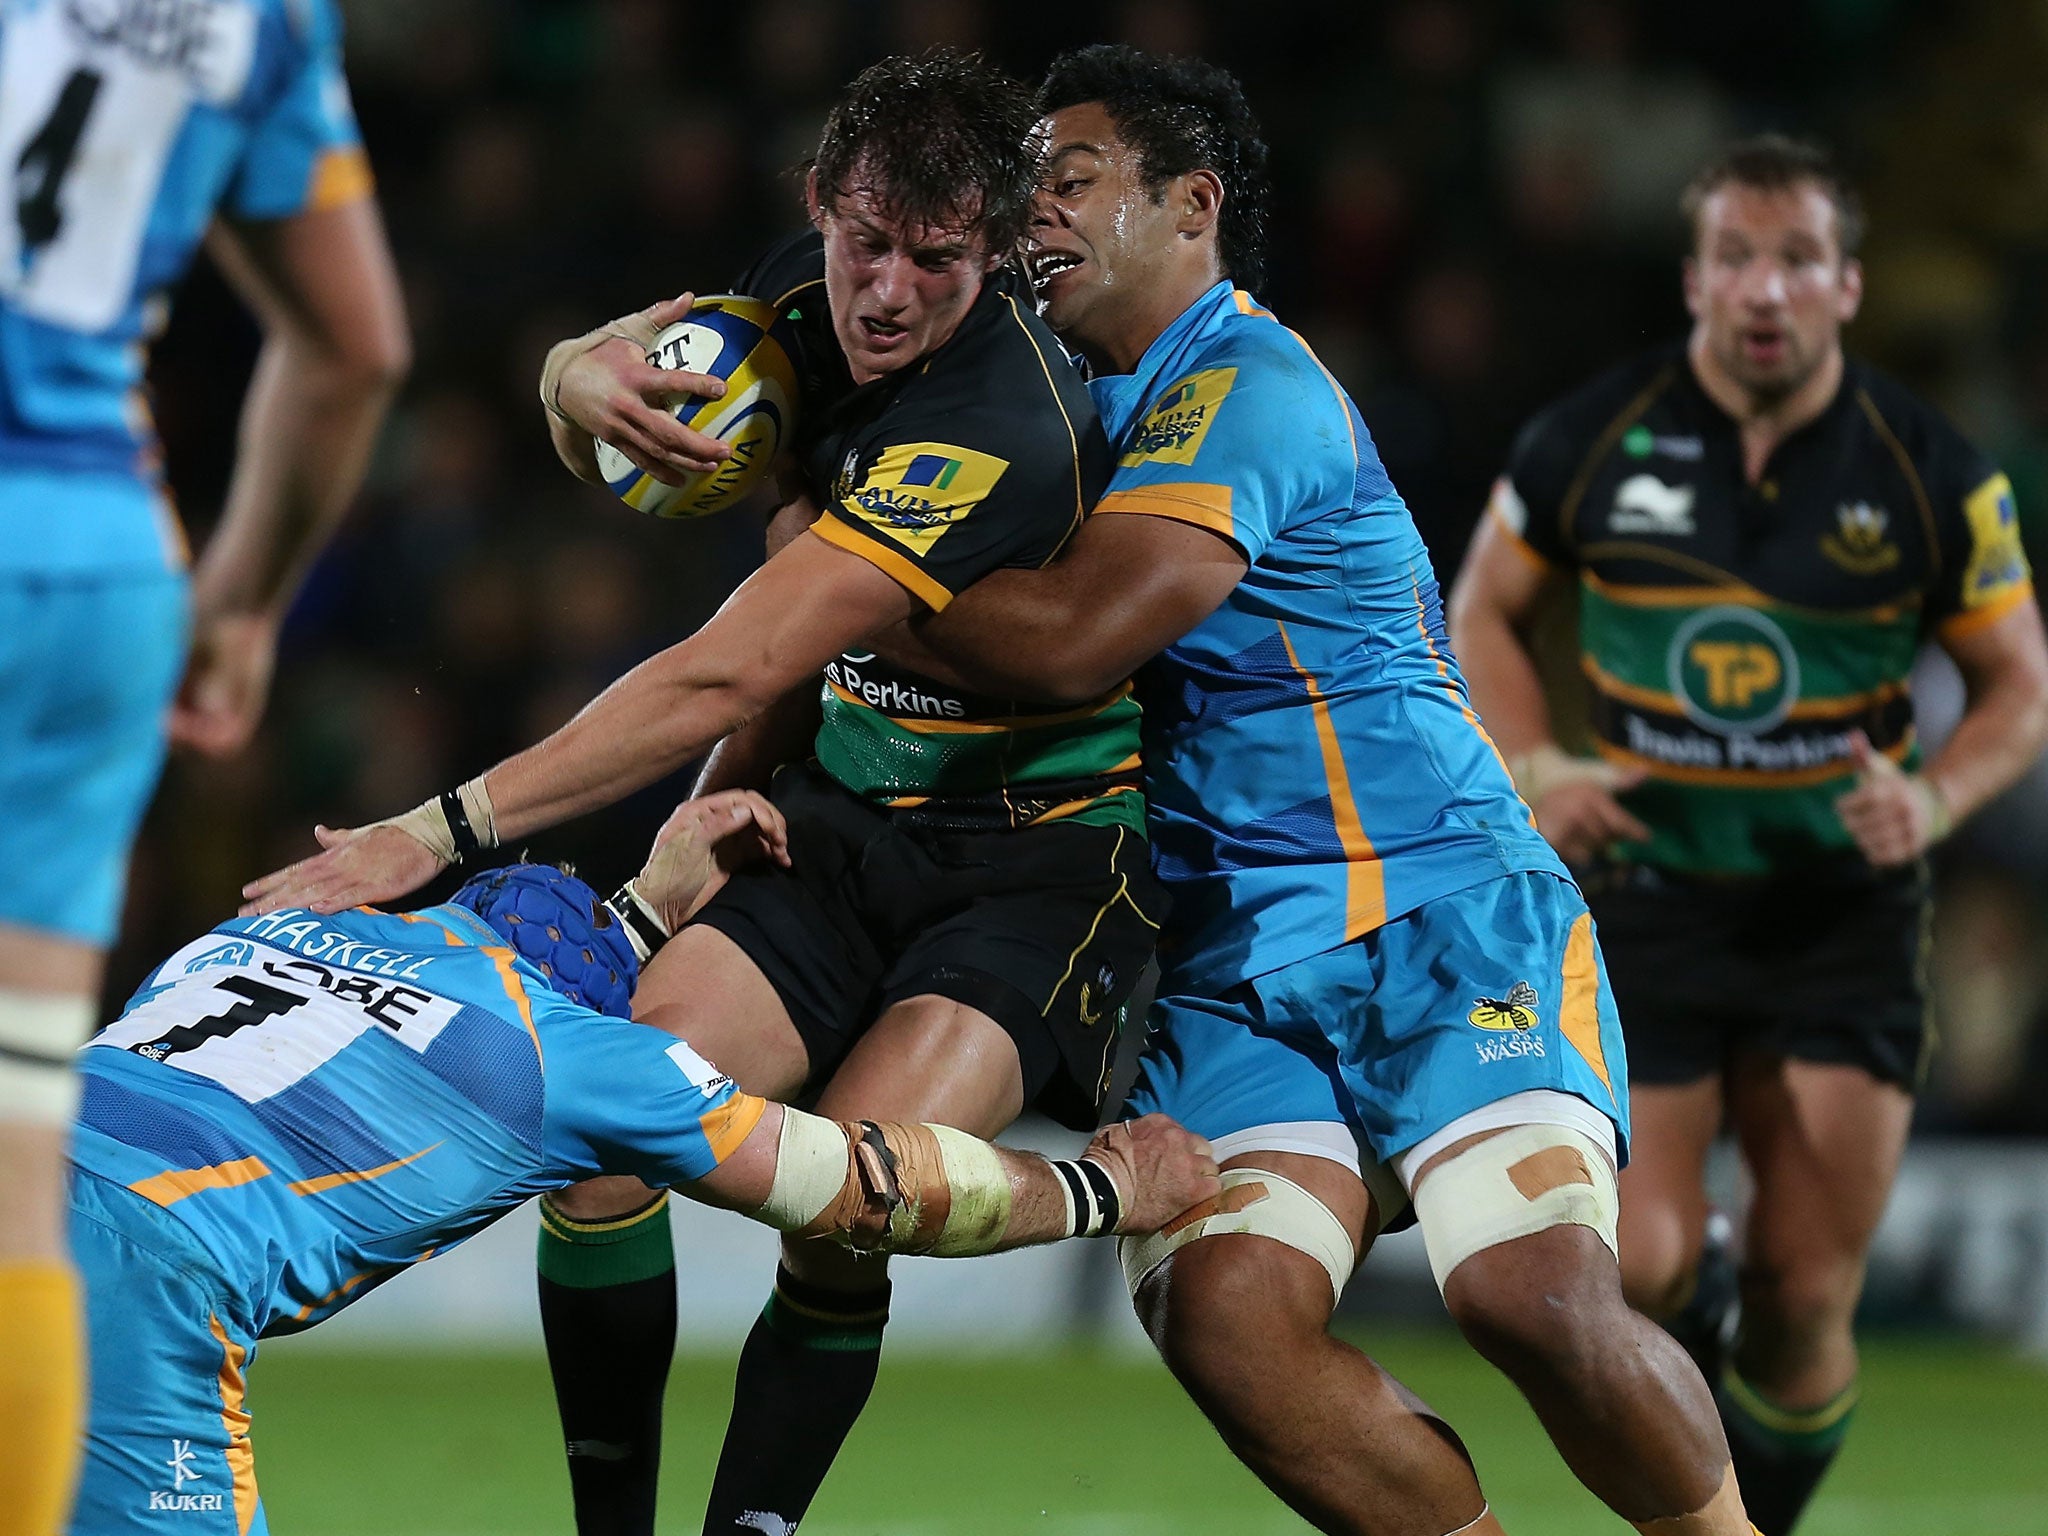 Tom Wood returns to domestic action with Northampton tonight